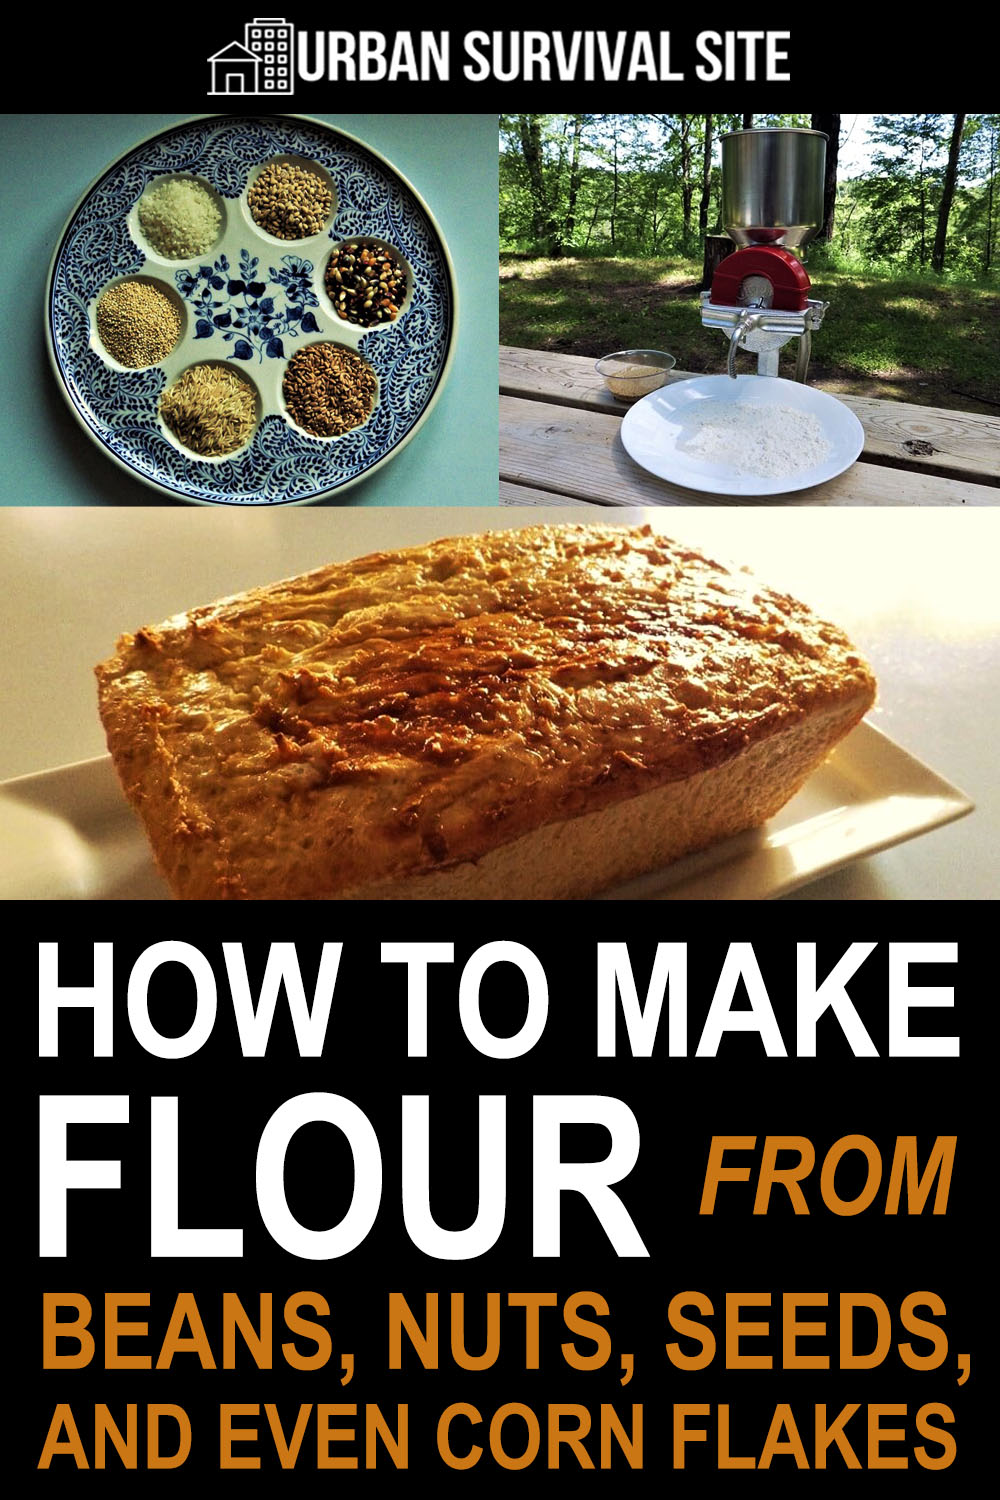 How to Make Flour from Beans, Nuts, Seeds and Even Corn Flakes